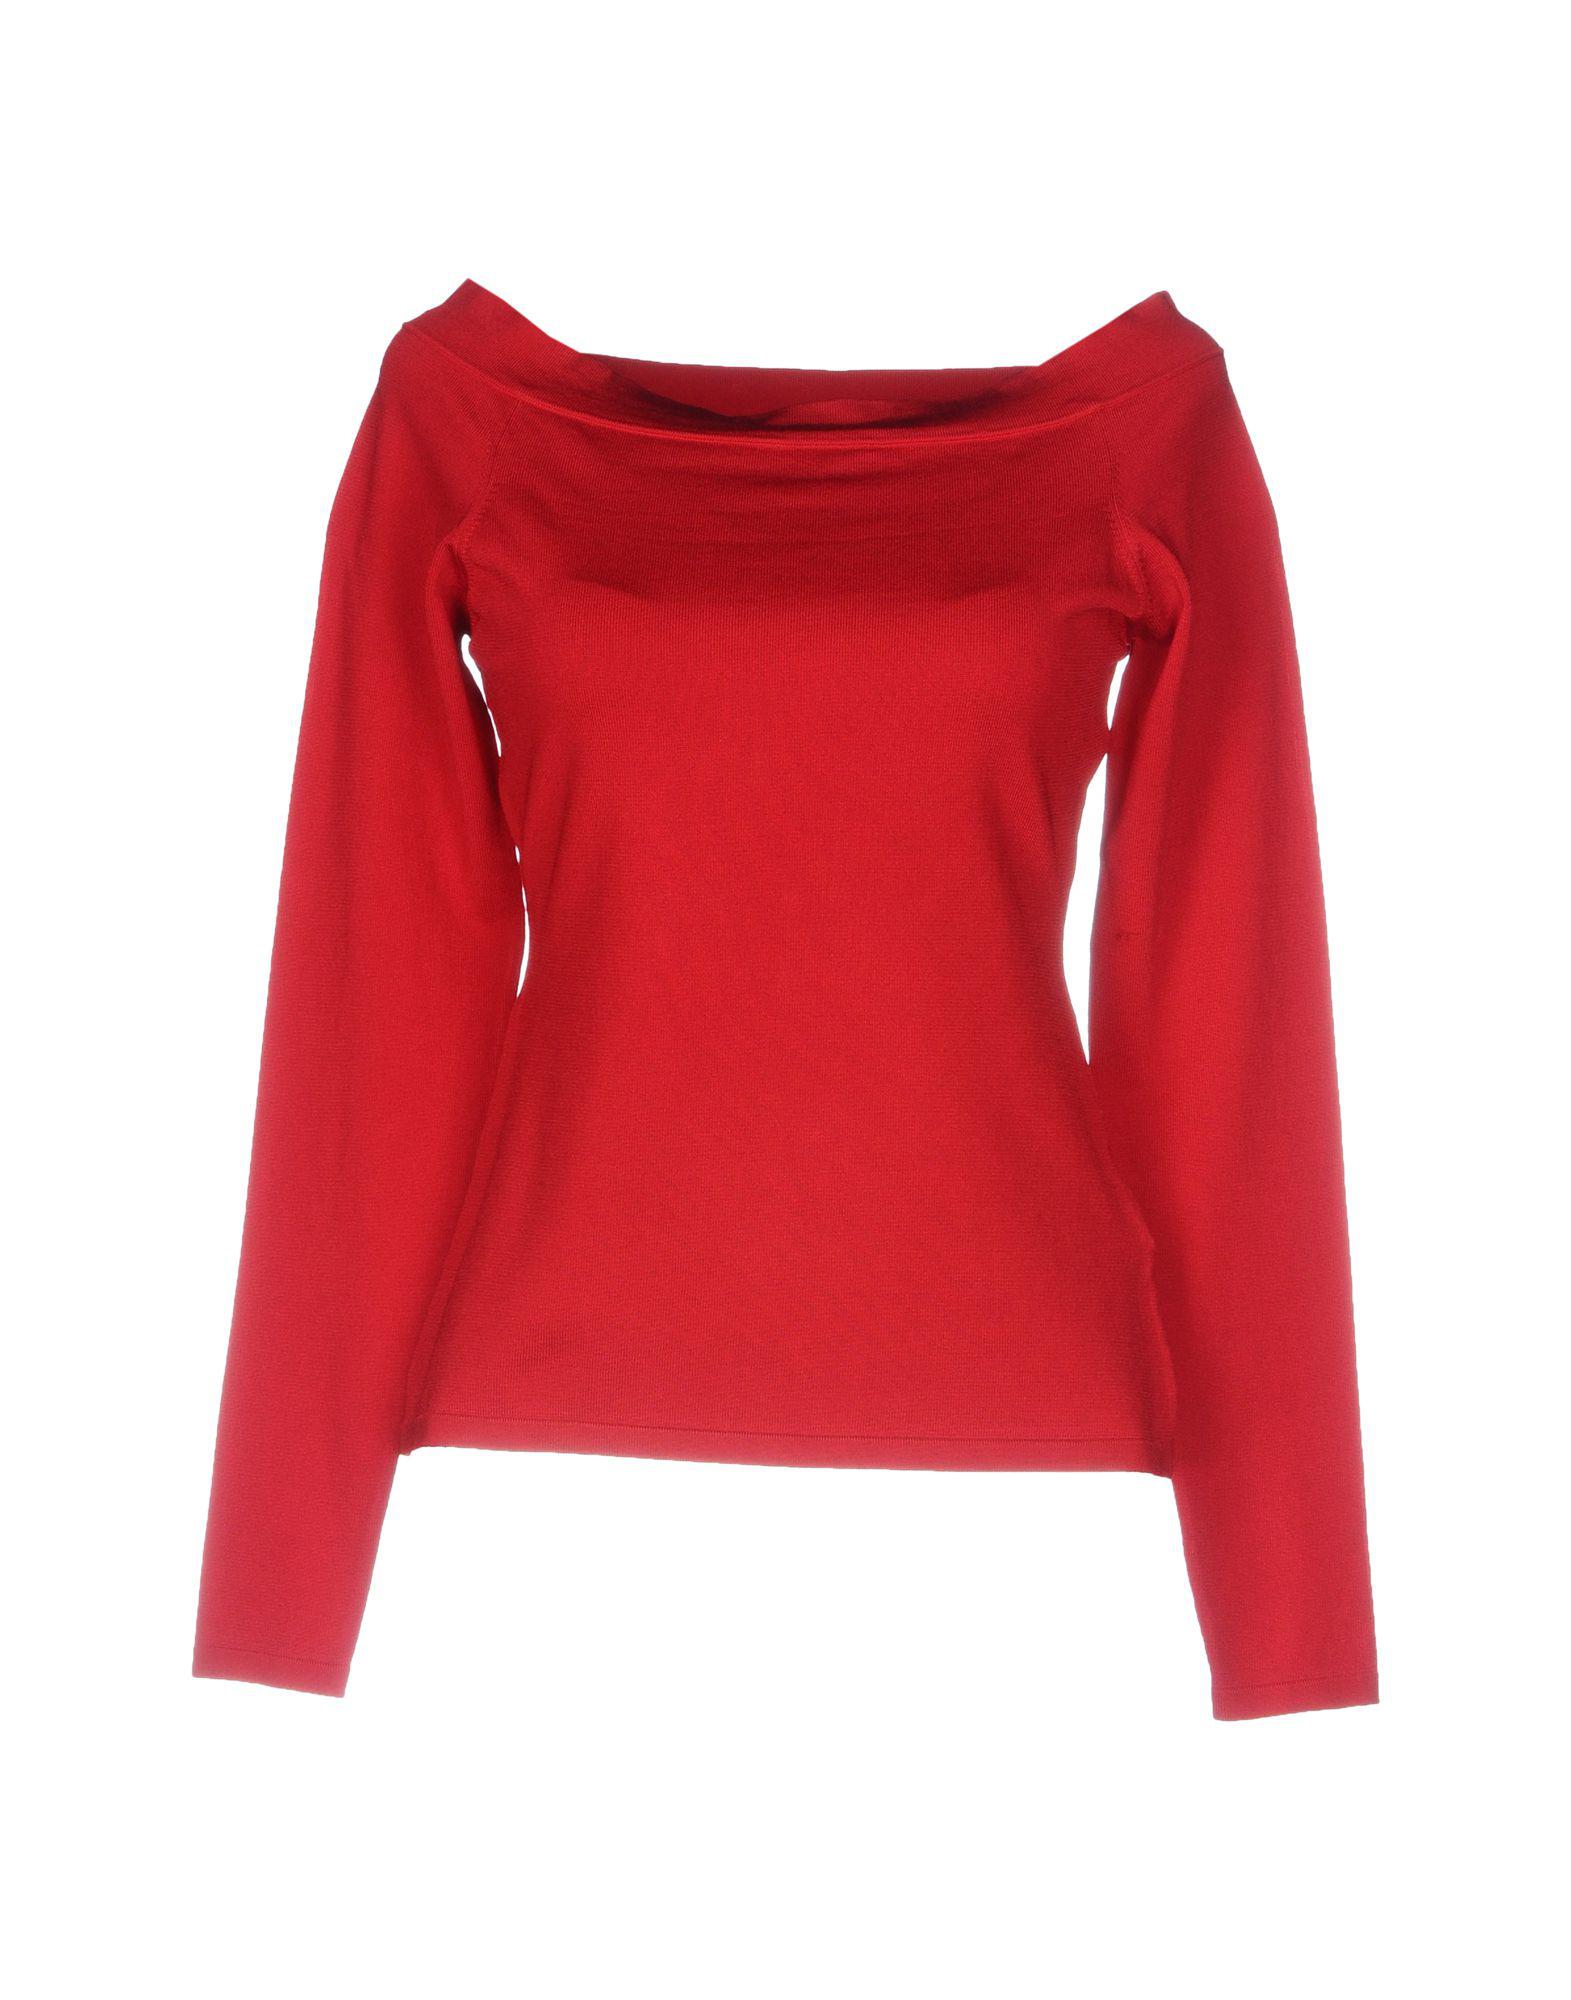 Lyst - Guess T-shirt in Red